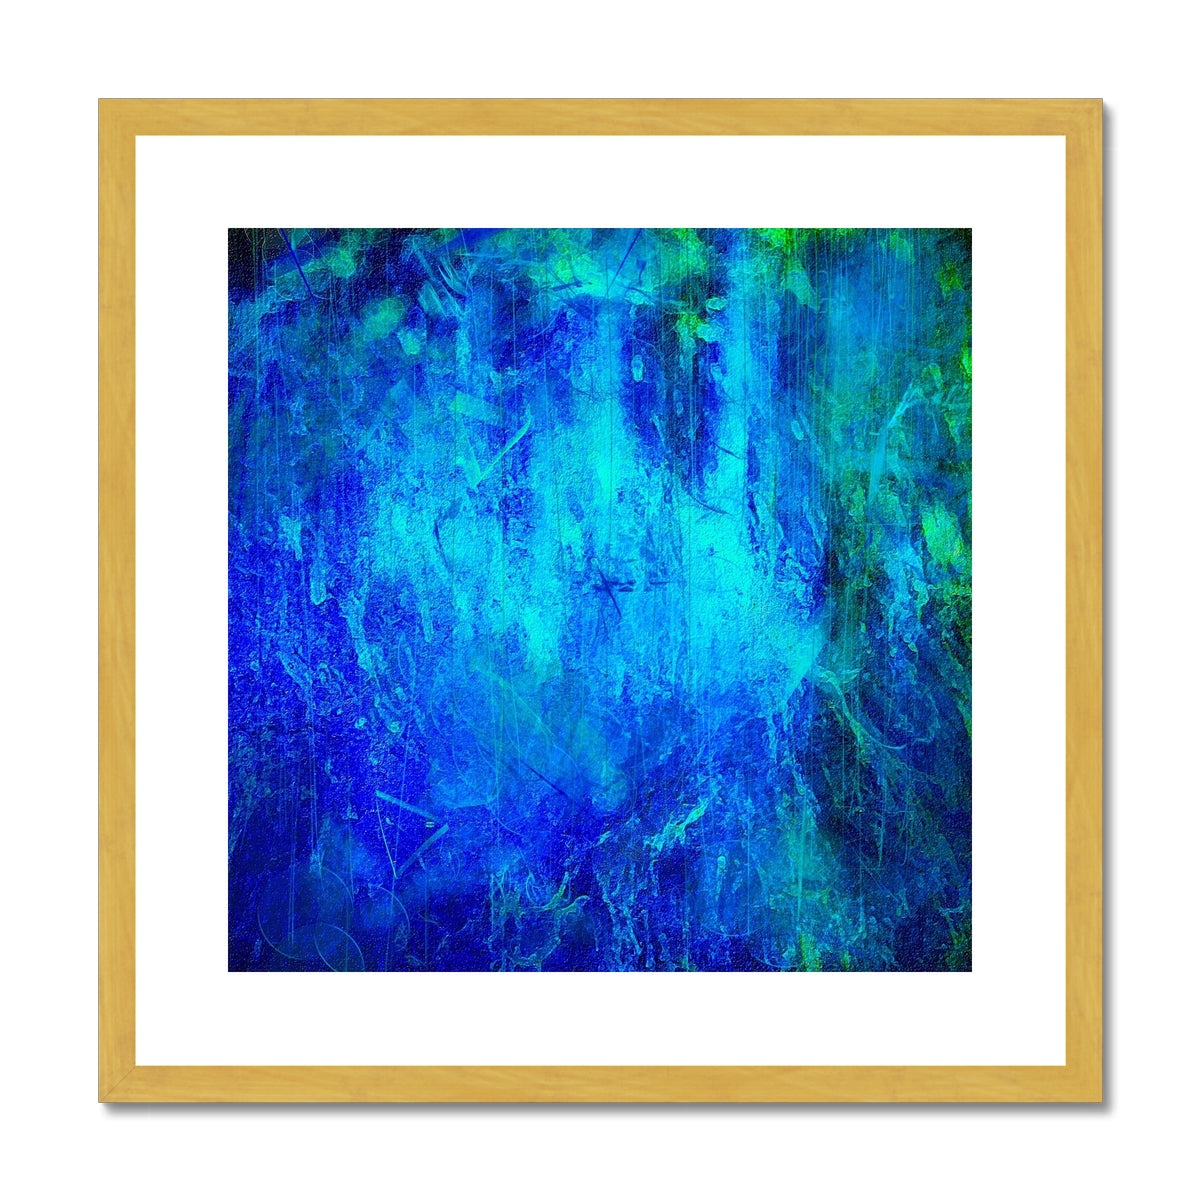 The Waterfall Abstract Painting | Antique Framed & Mounted Prints From Scotland-Antique Framed & Mounted Prints-Abstract & Impressionistic Art Gallery-20"x20"-Gold Frame-Paintings, Prints, Homeware, Art Gifts From Scotland By Scottish Artist Kevin Hunter